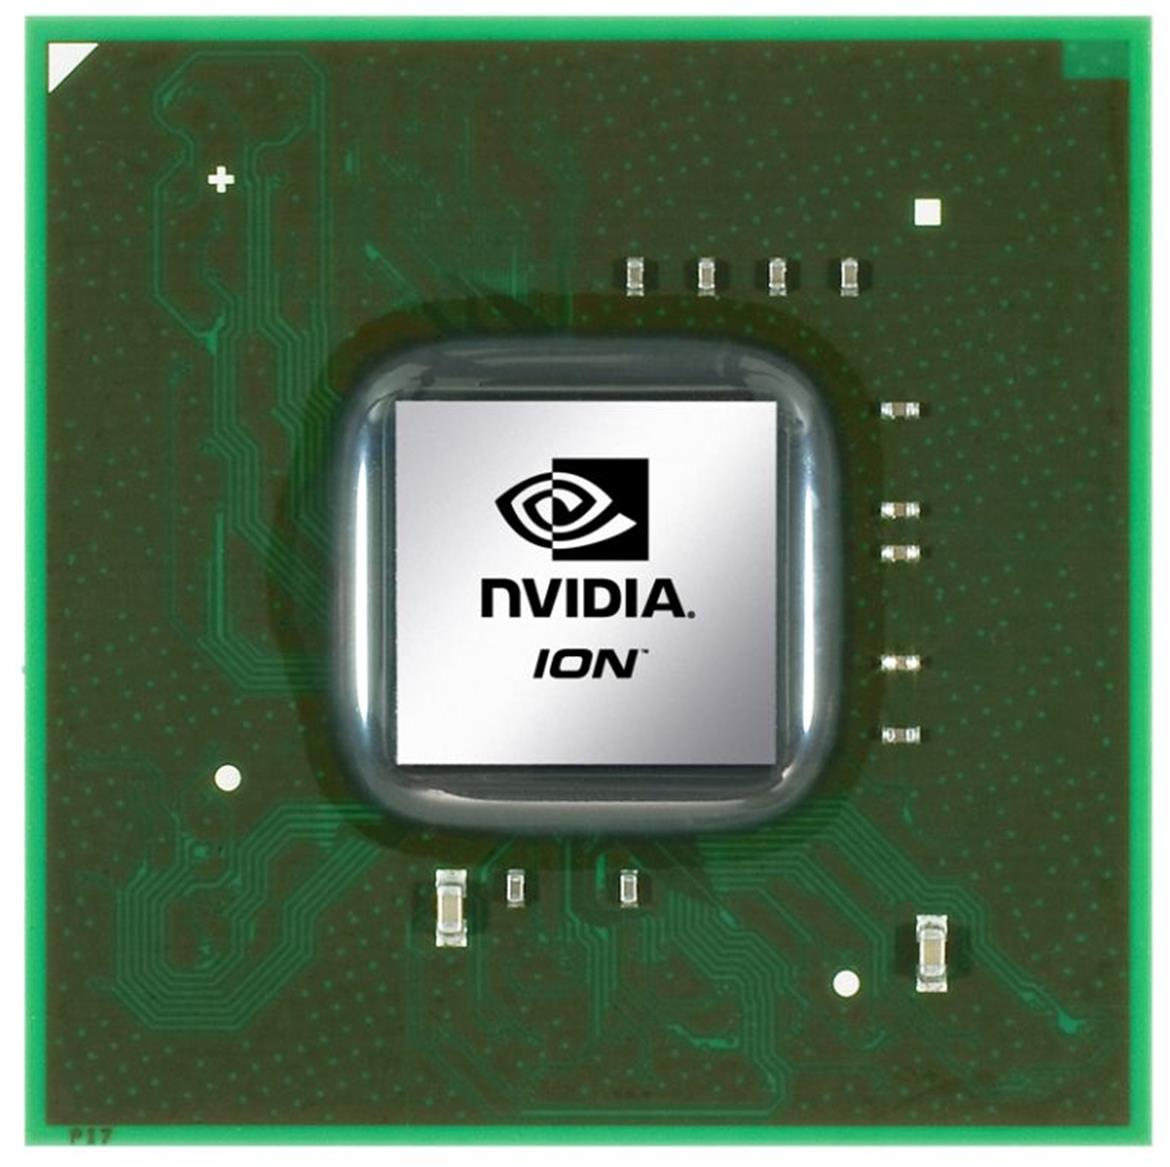 NVIDIA Next-Gen ION Preview, Optimus Enabled